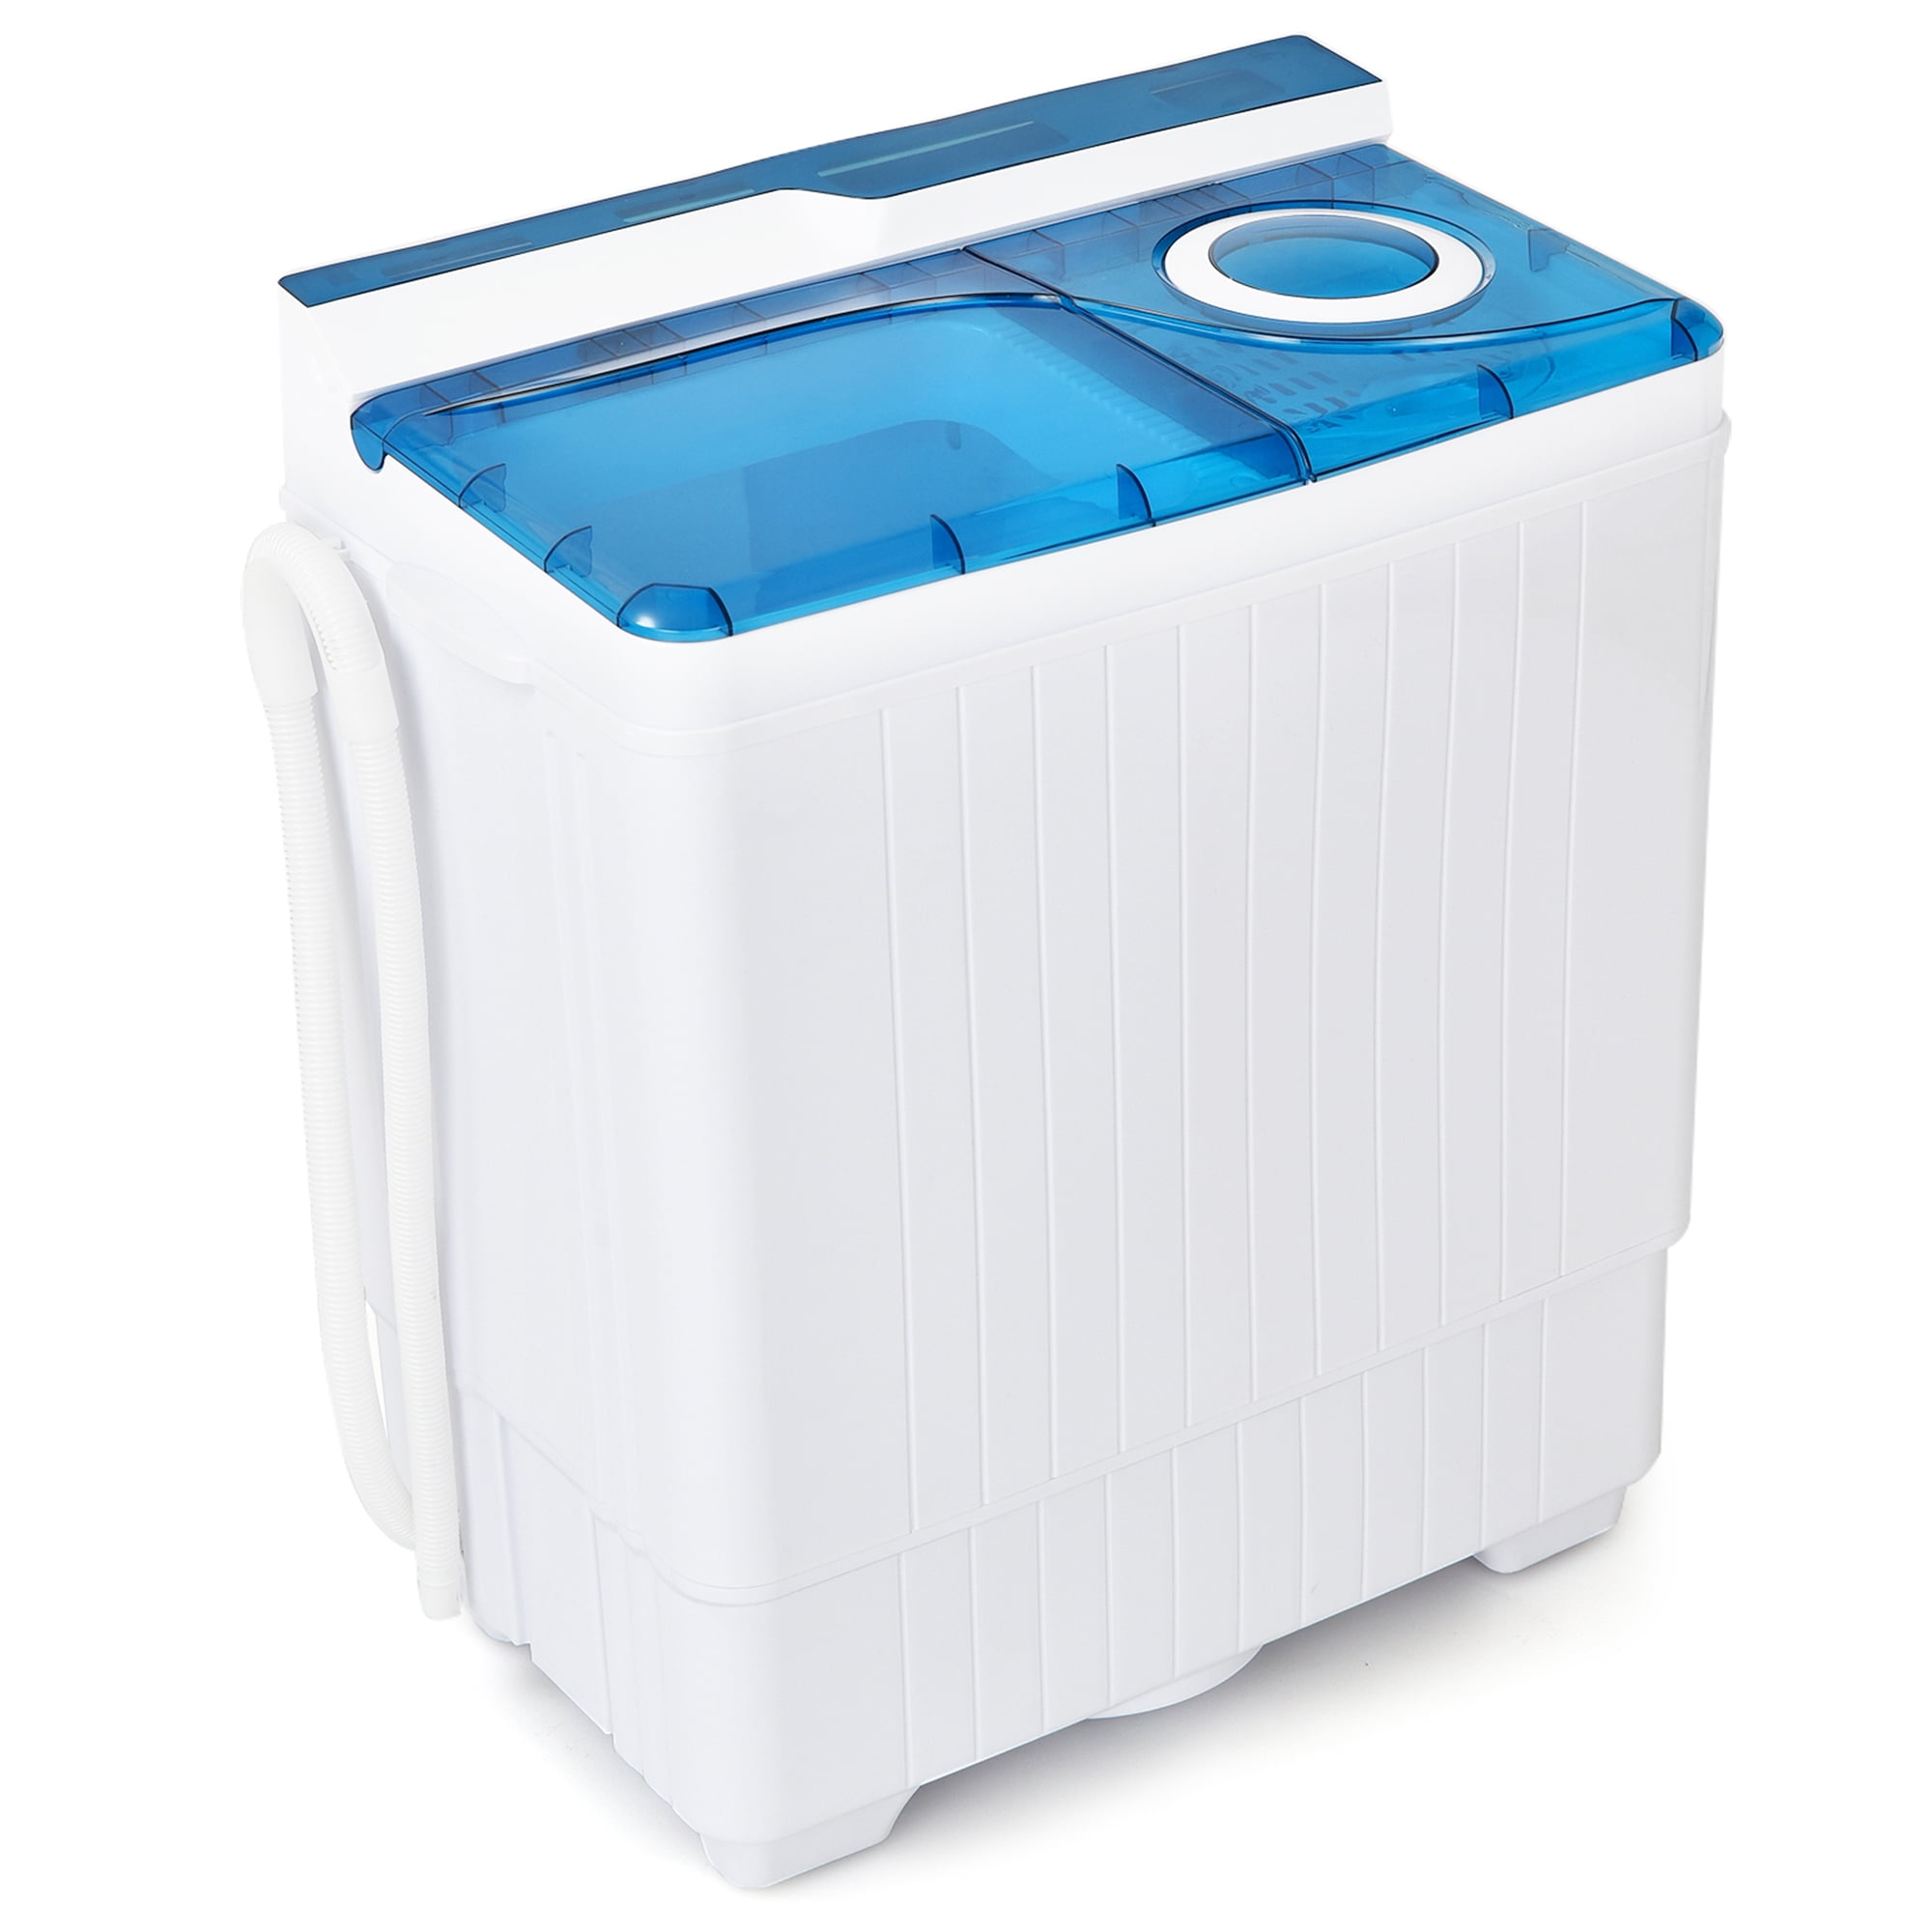 ROVSUN 15LBS Portable Washing Machine, Electric Washer and Dryer Combo with  Washer(9lbs) & Spiner(6lbs) & Pump Draining, Great for Home Camping Dorm  College Apartment (Blue) 